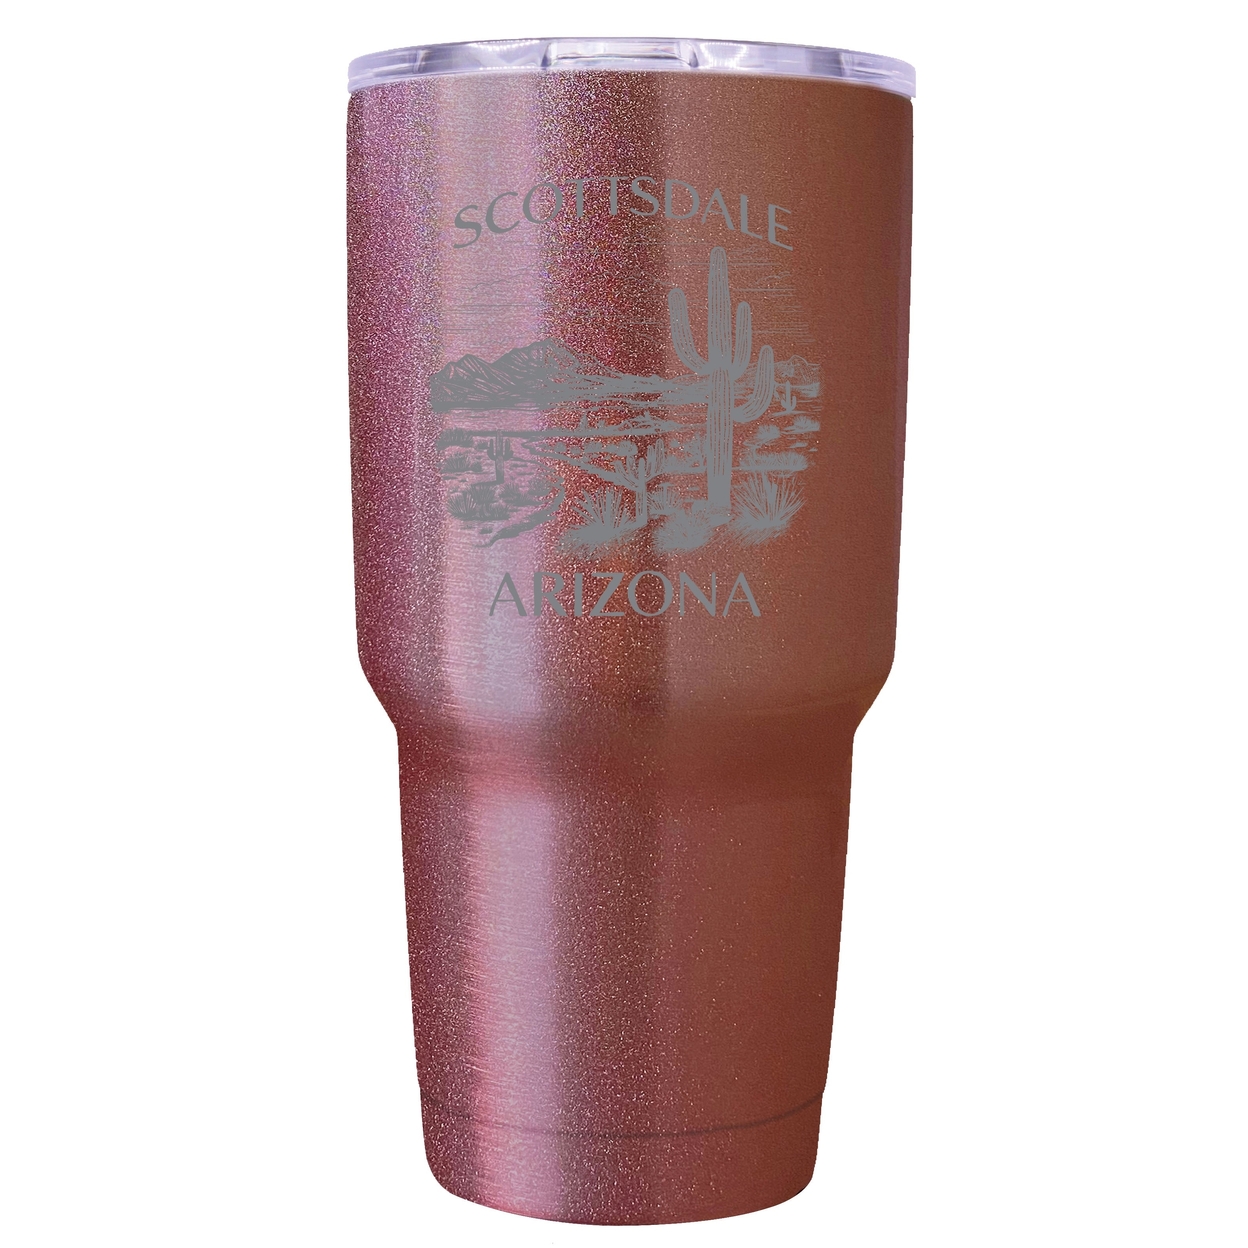 Scottsdale Arizona Souvenir 24 Oz Engraved Insulated Stainless Steel Tumbler - Rose Gold,,4-Pack